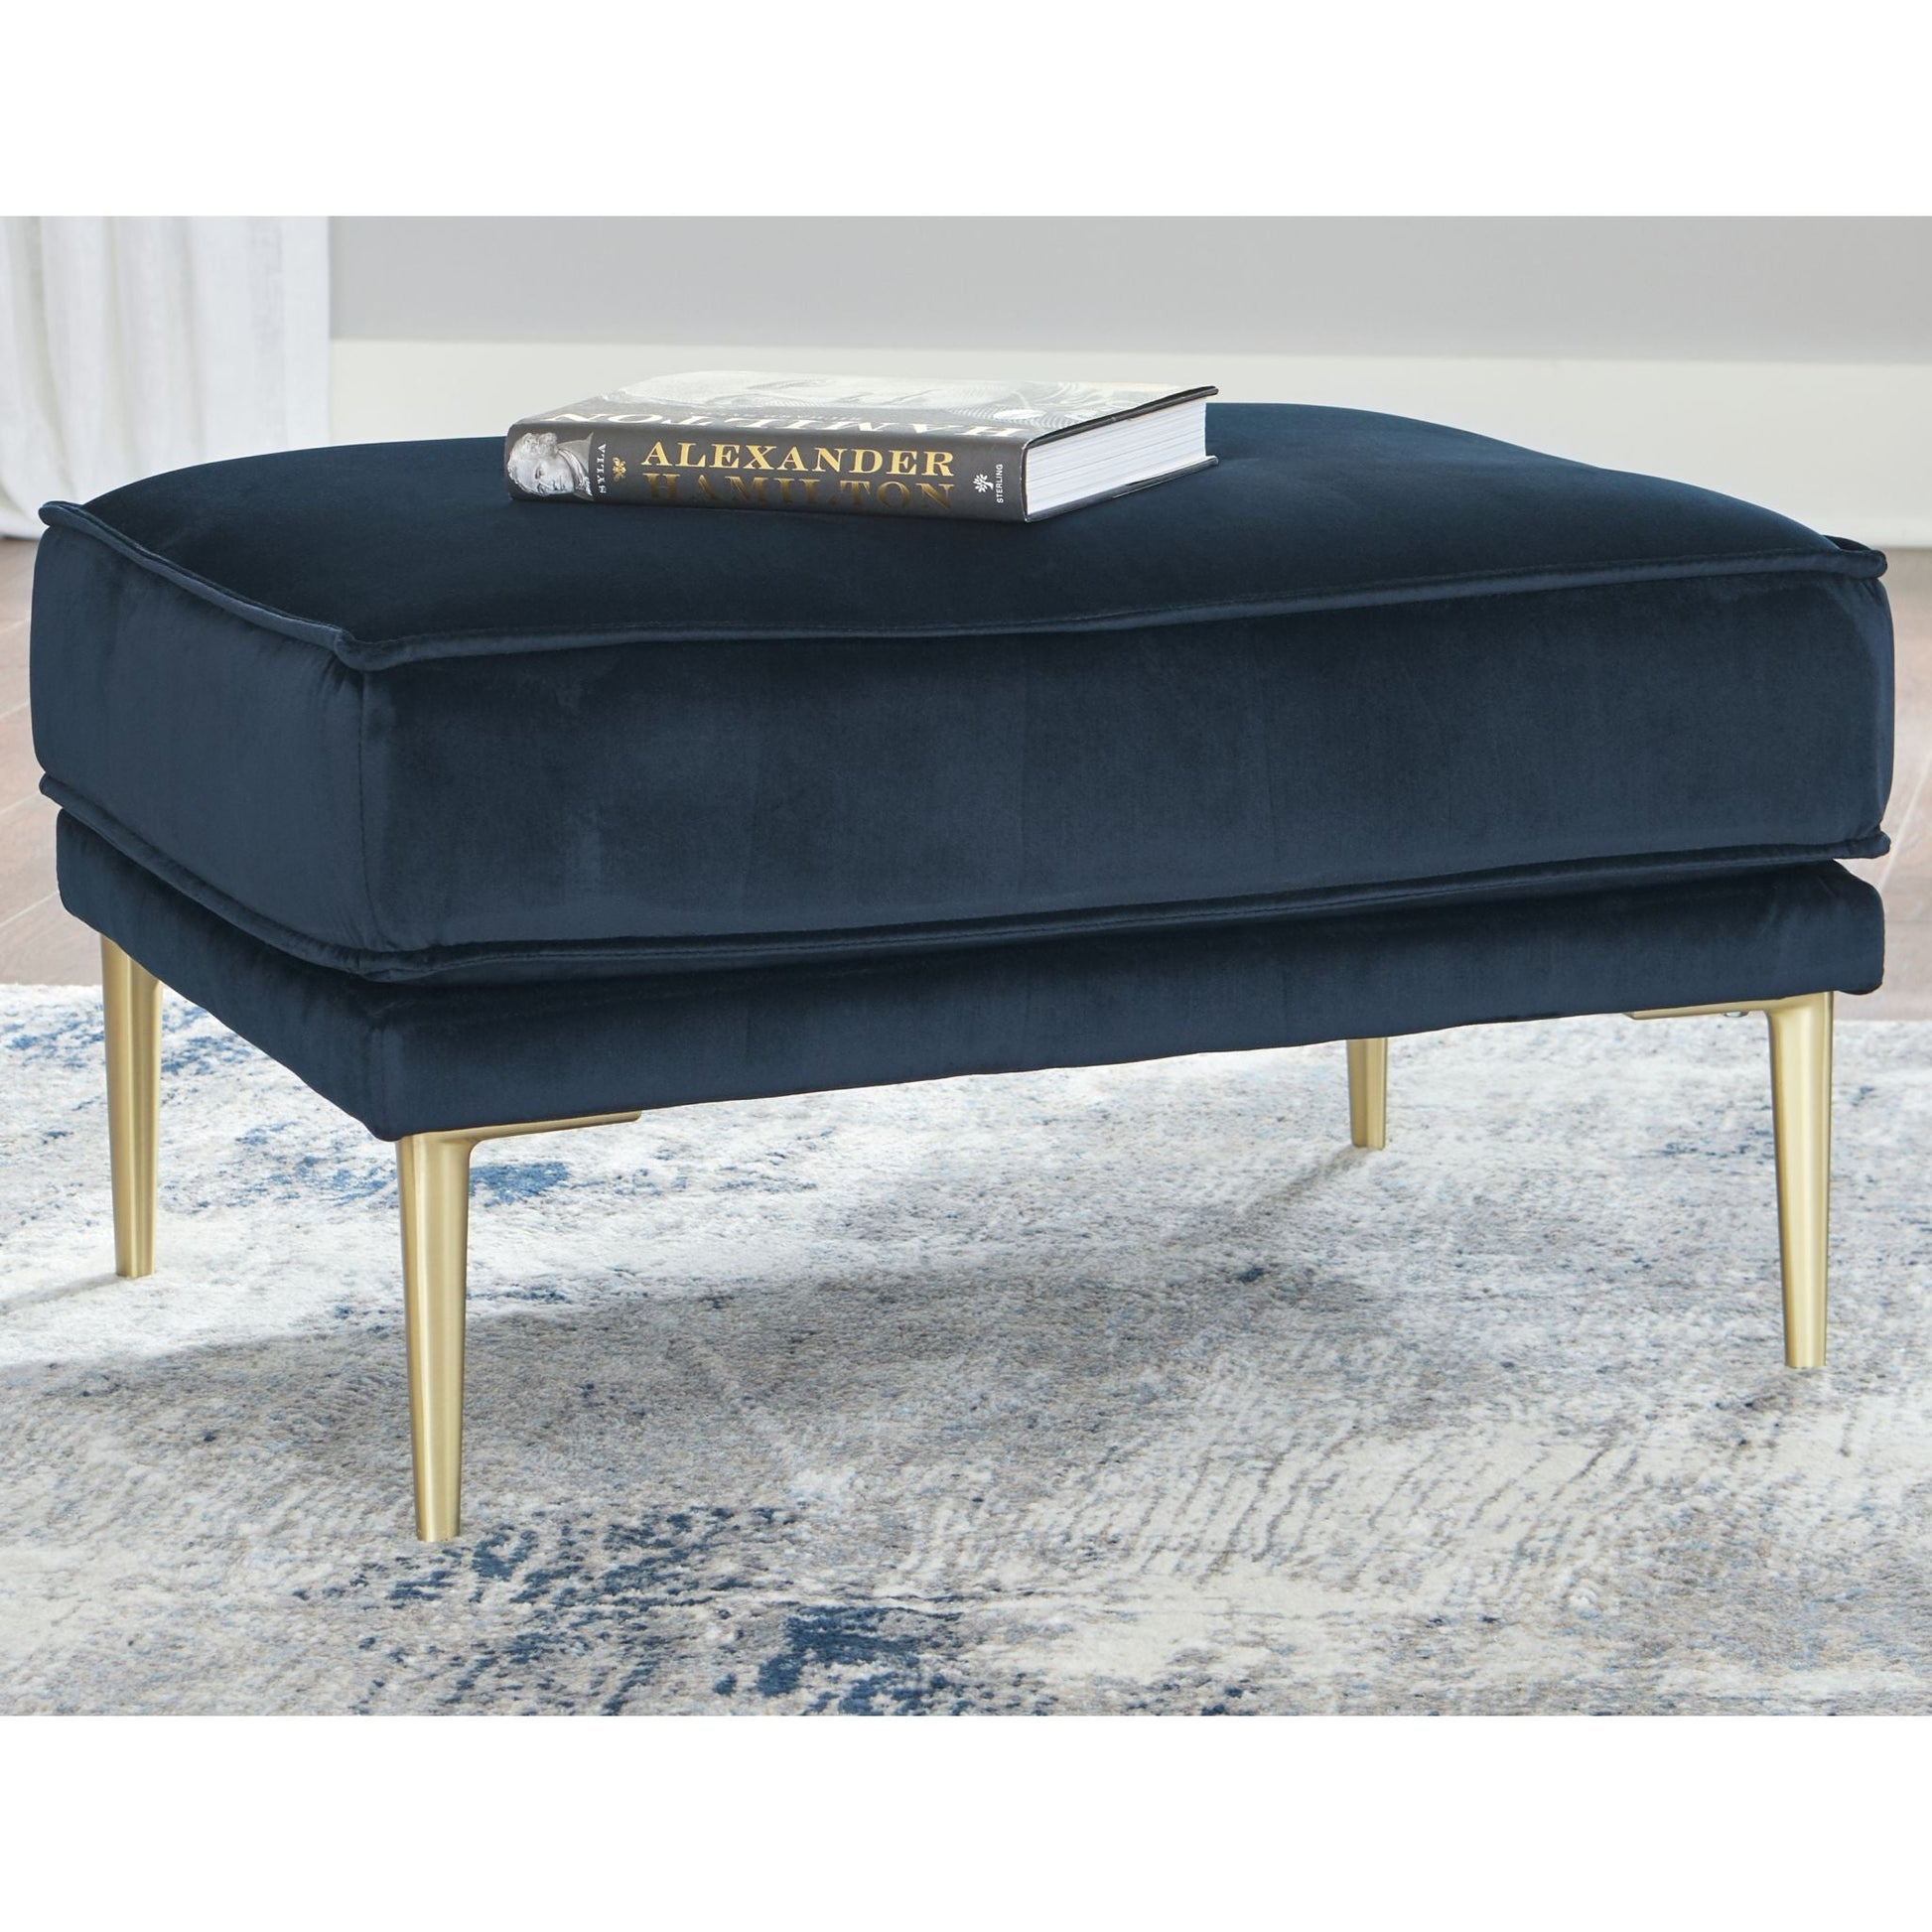 Macleary Ottoman - Navy